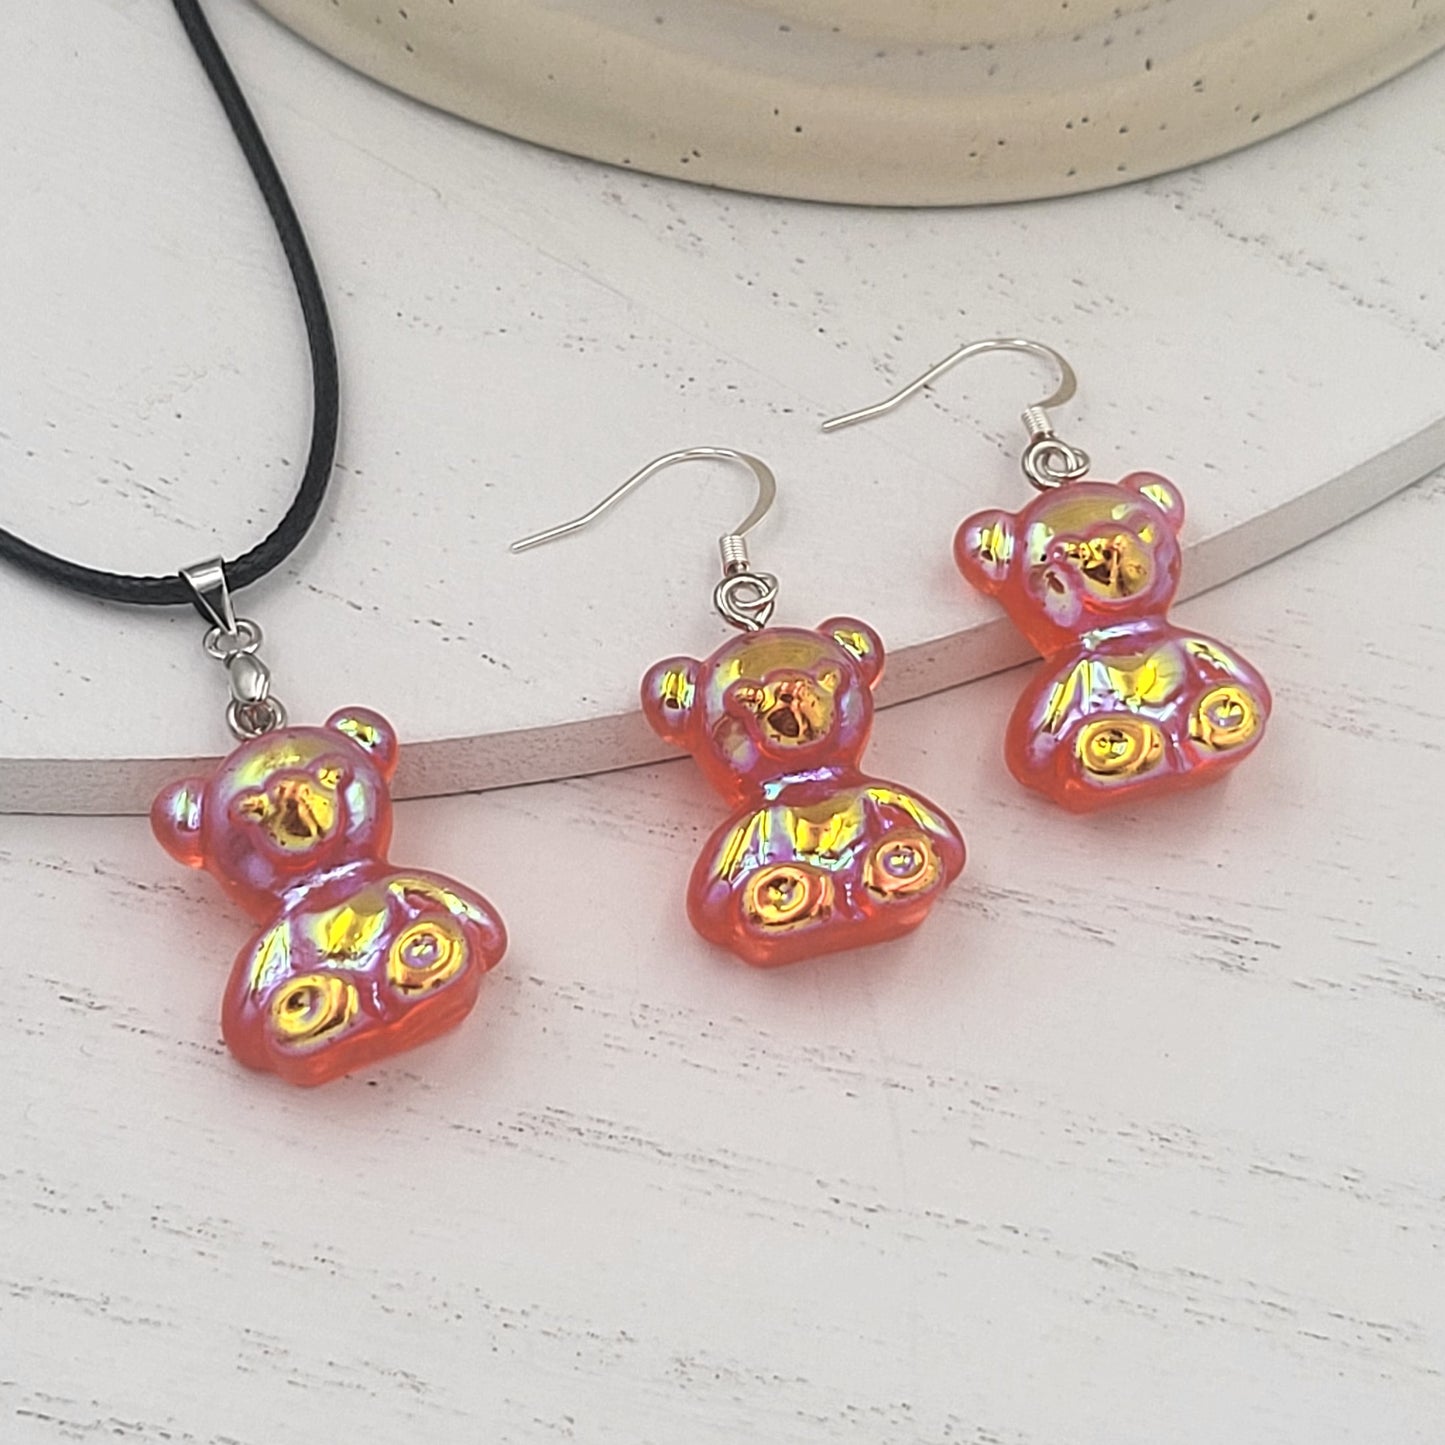 BESHEEK Silvertone and Red Resin Gummy Bear Jewelry Set | Hypoallergenic Boho Kitchsy Artistic Funky Cute Style Fashion Necklace and Earrings